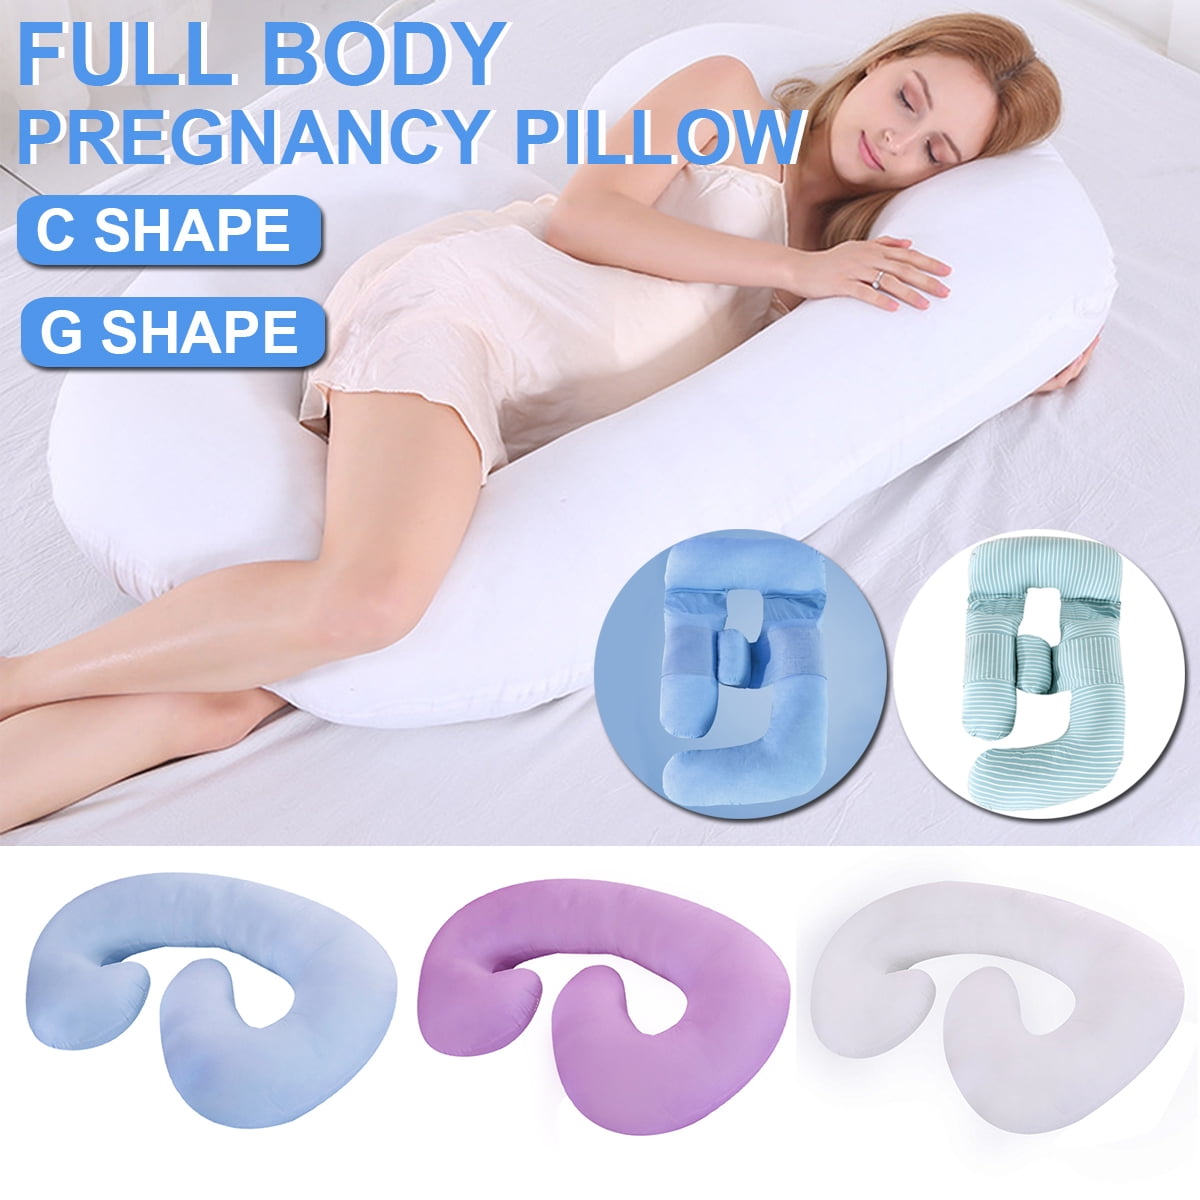 G Shaped Pillow Case Extra Filled Support for Pregnancy Maternity Nursing UK 